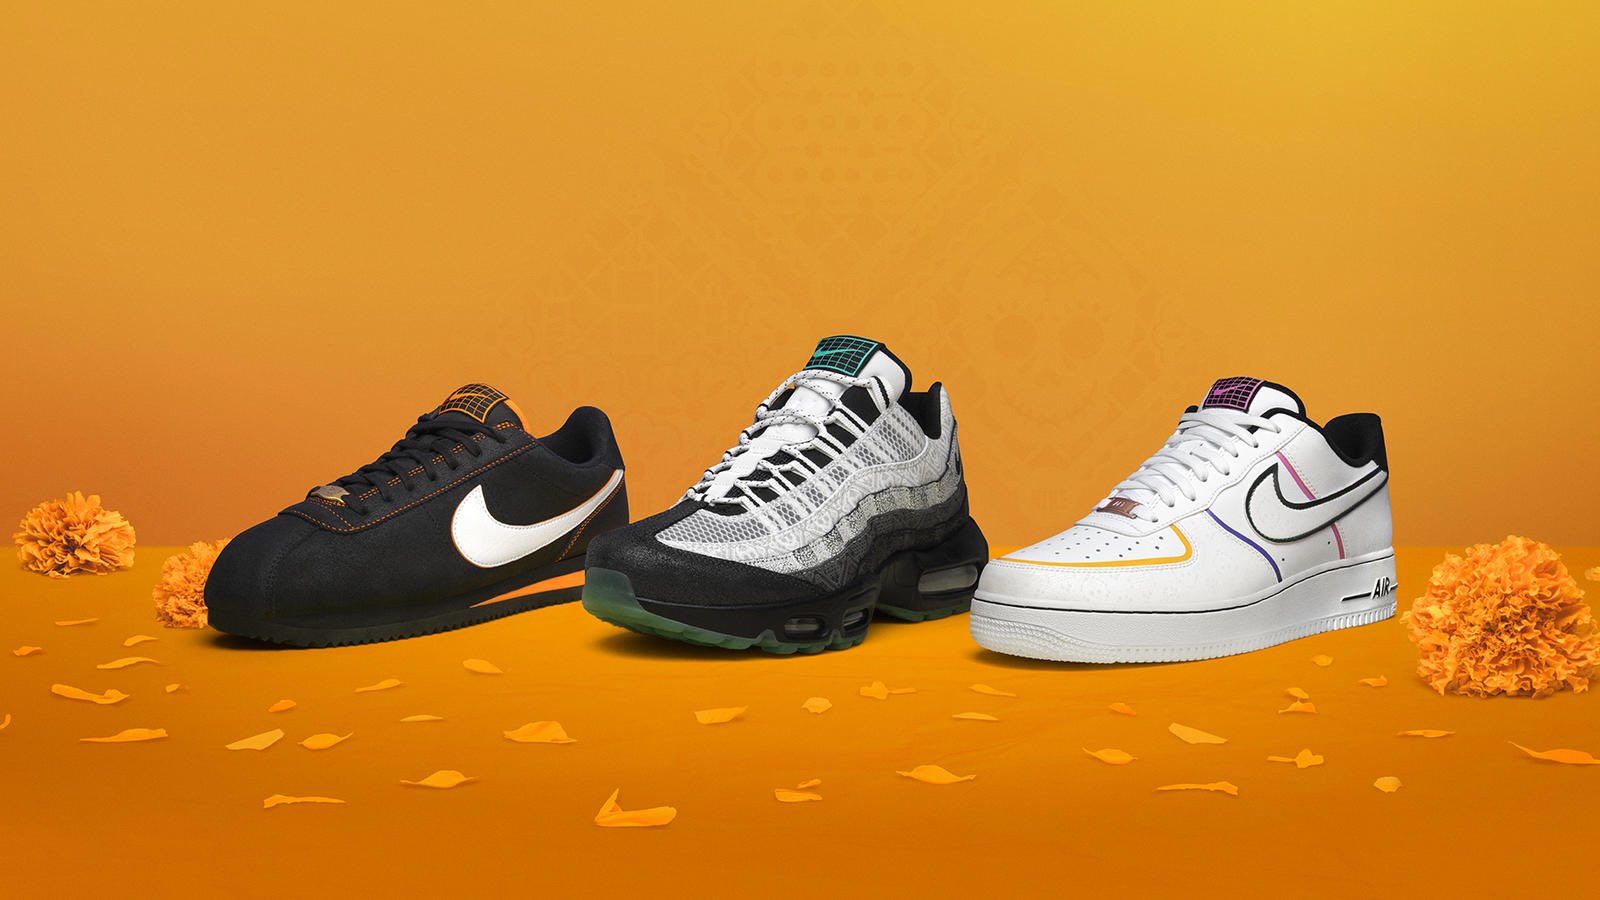 oficial Herencia Uluru US11 on Twitter: "Nike Día de Los Muertos Day of the Dead Pack Official  Release Details - Nike News https://t.co/BQhlmh9PaW  https://t.co/wKNcRrX5G0" / Twitter